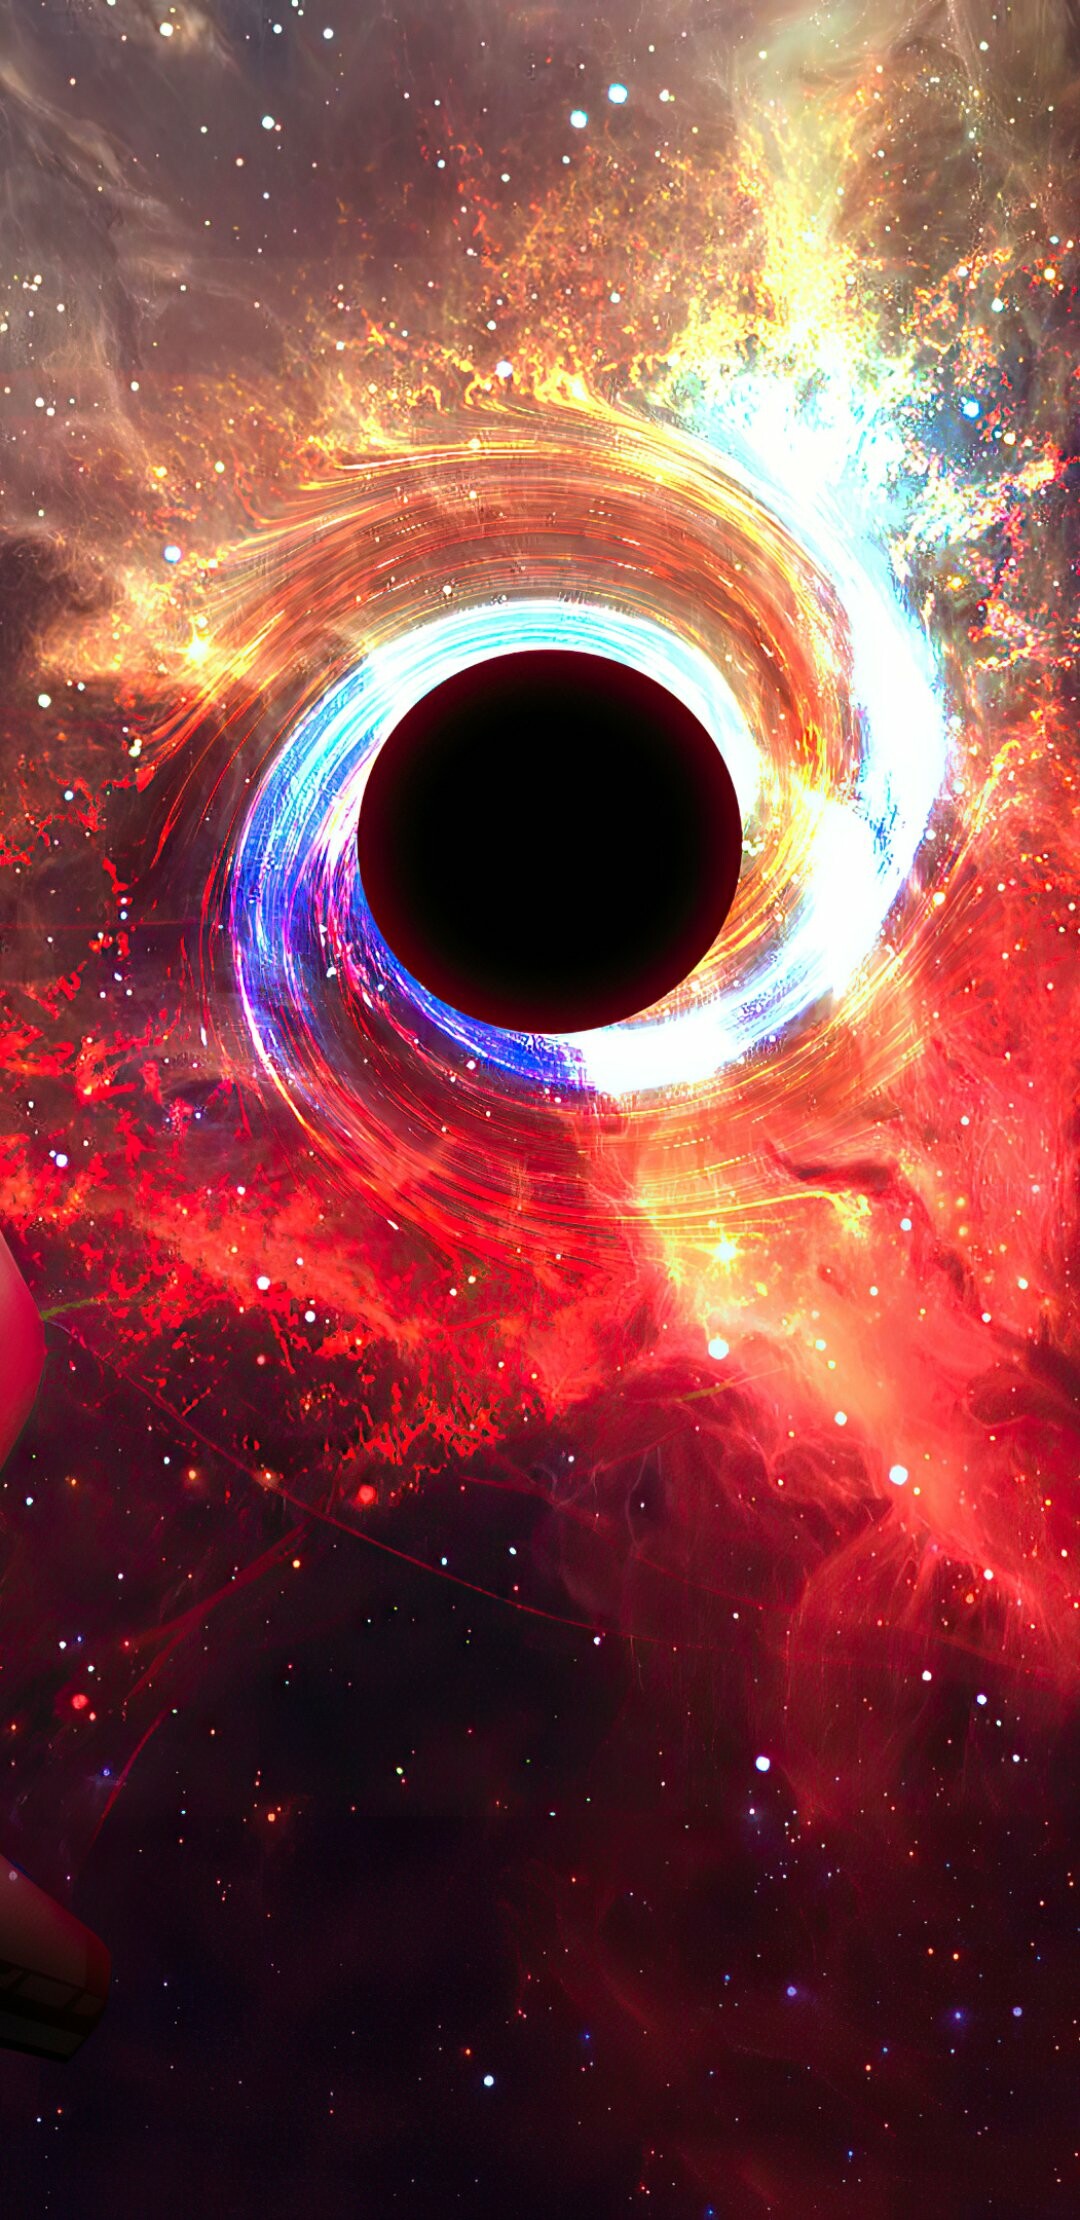 Black Hole: A volume of space where gravity is so strong that nothing, not even light, can escape from it. 1080x2220 HD Wallpaper.